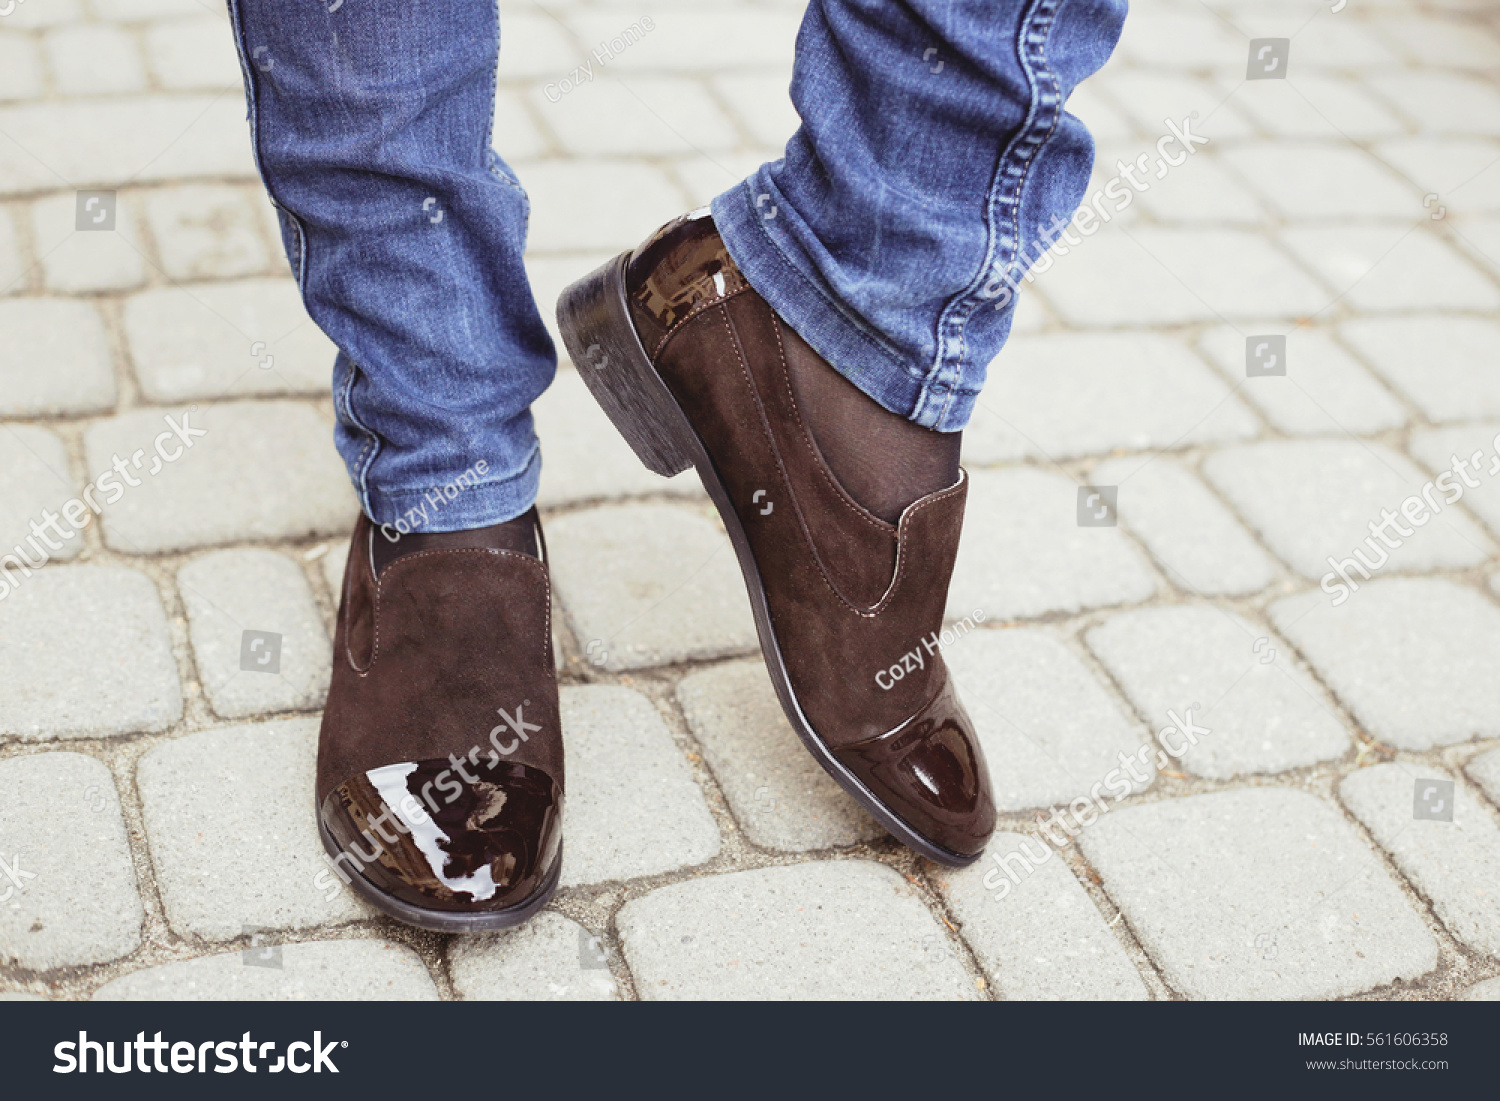 jeans and suede shoes